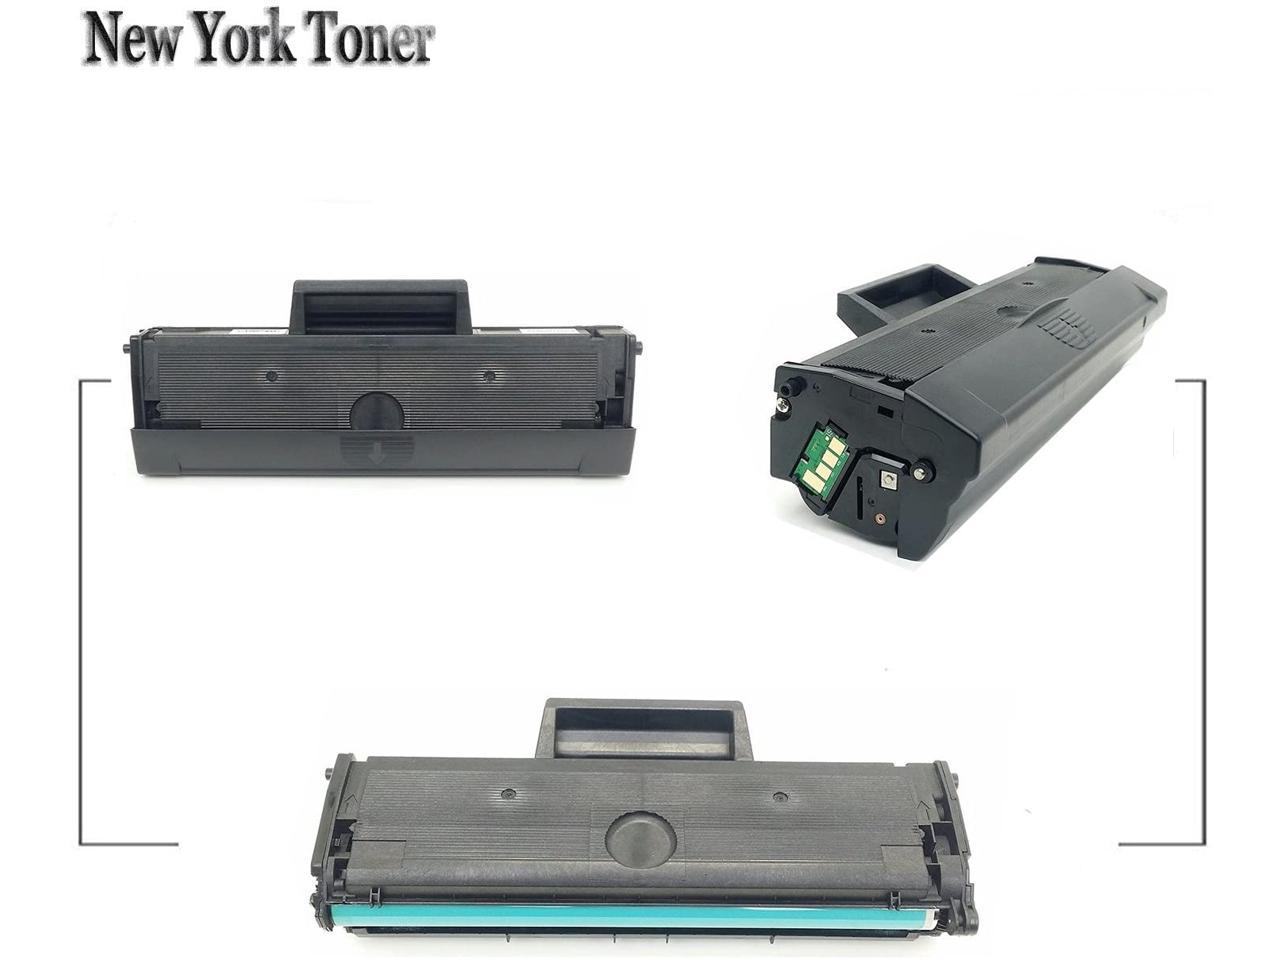 B1163w for Dell B1160 331-7335 B1165nfw B1160W NYT Compatible Toner Cartridge Replacement for Dell 1160 Black, 1-Pack